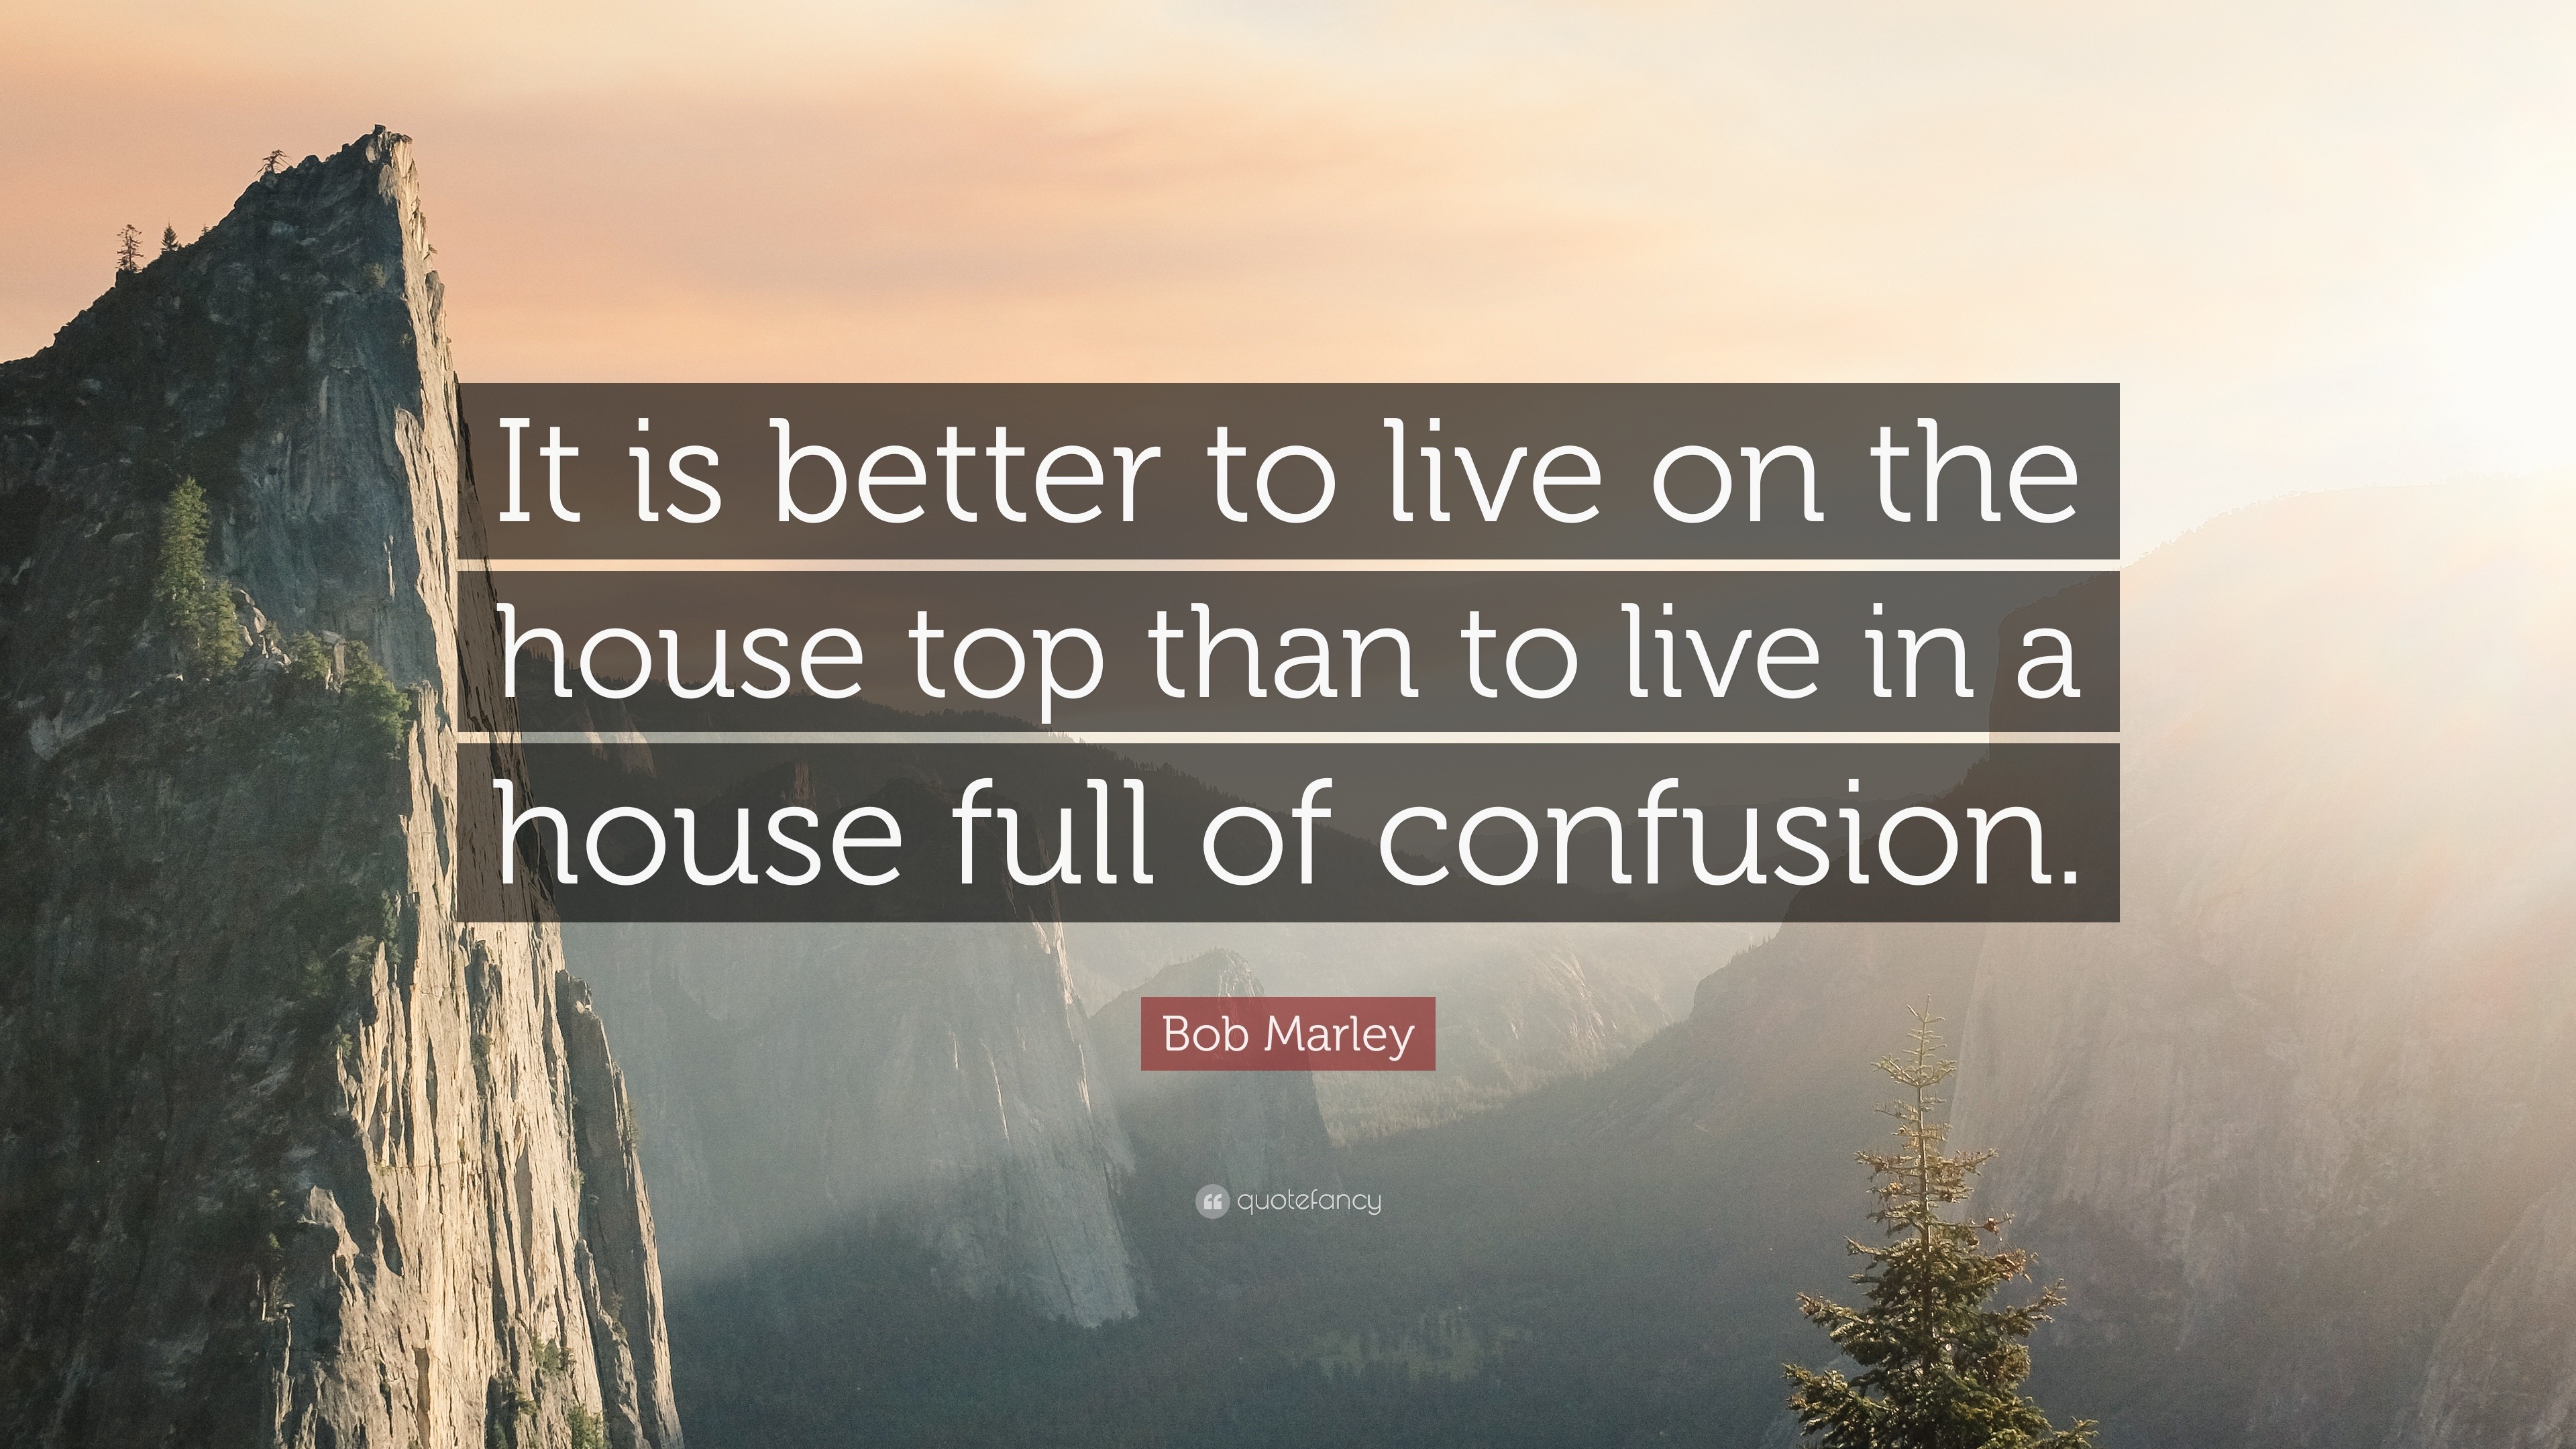 Bob Marley Quote: “It is better to live on the house top than to live ...